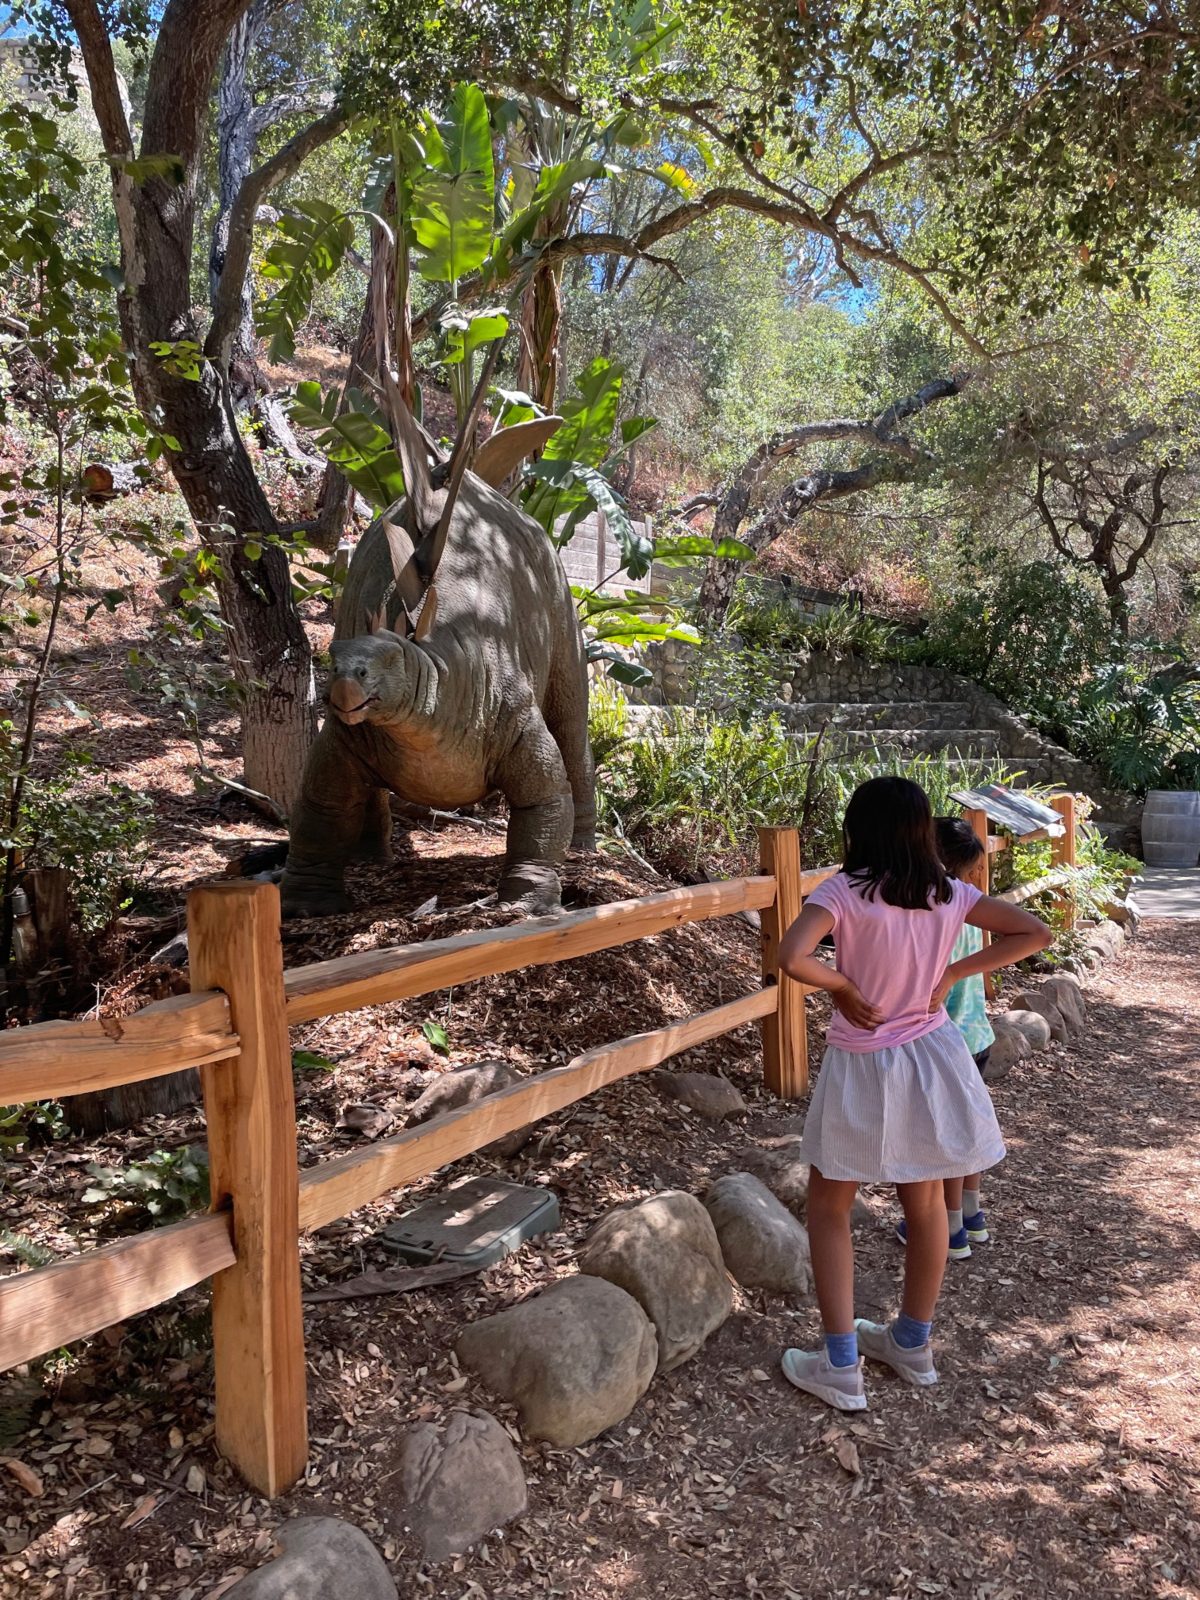 Things to Do in Santa Barbara with Kids